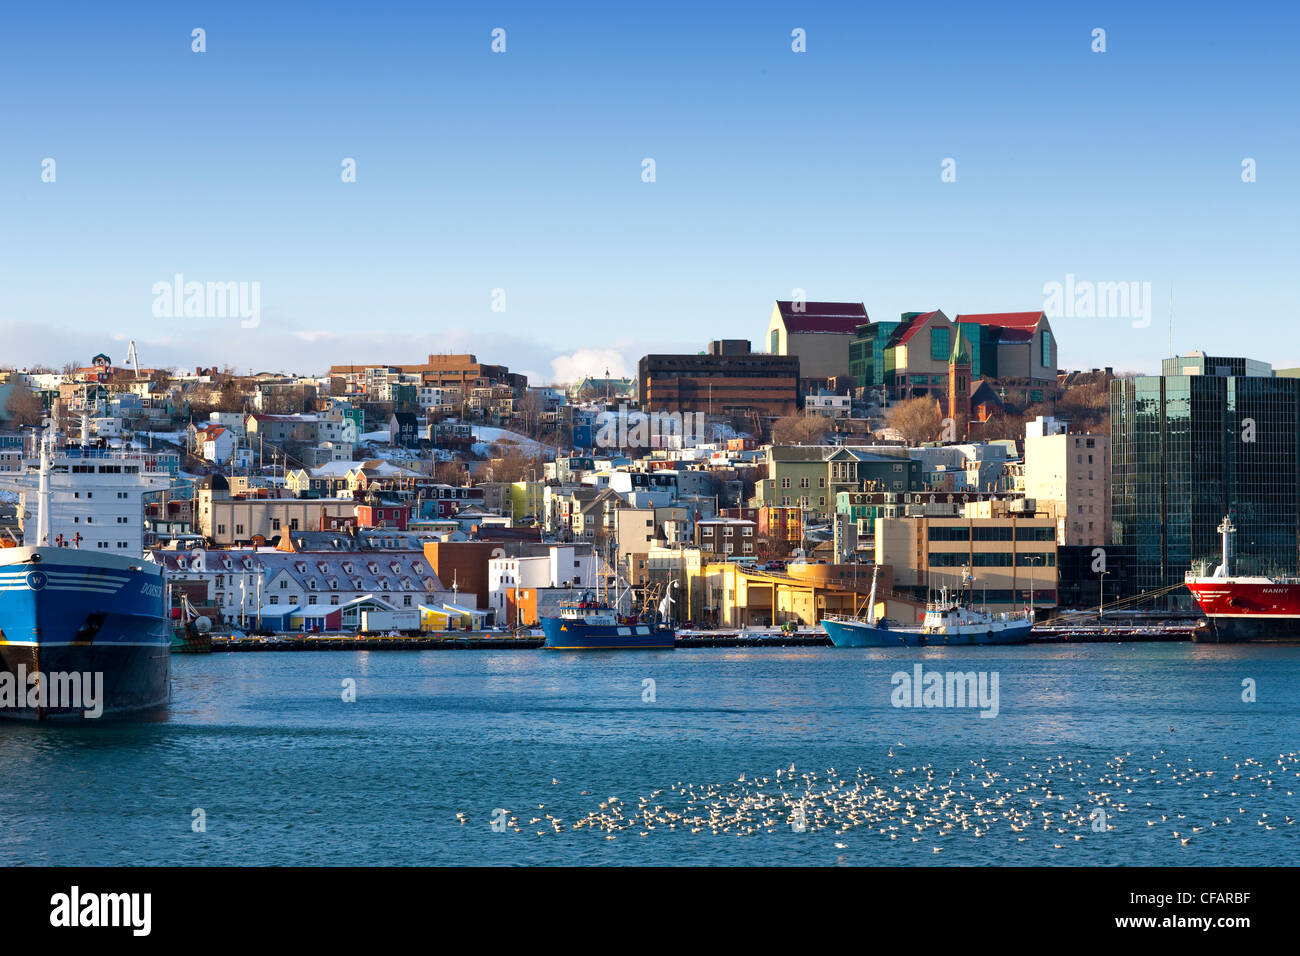 St. John's Harbour waterfront, Newfoundland and Labrador, Canada. Stock Photo